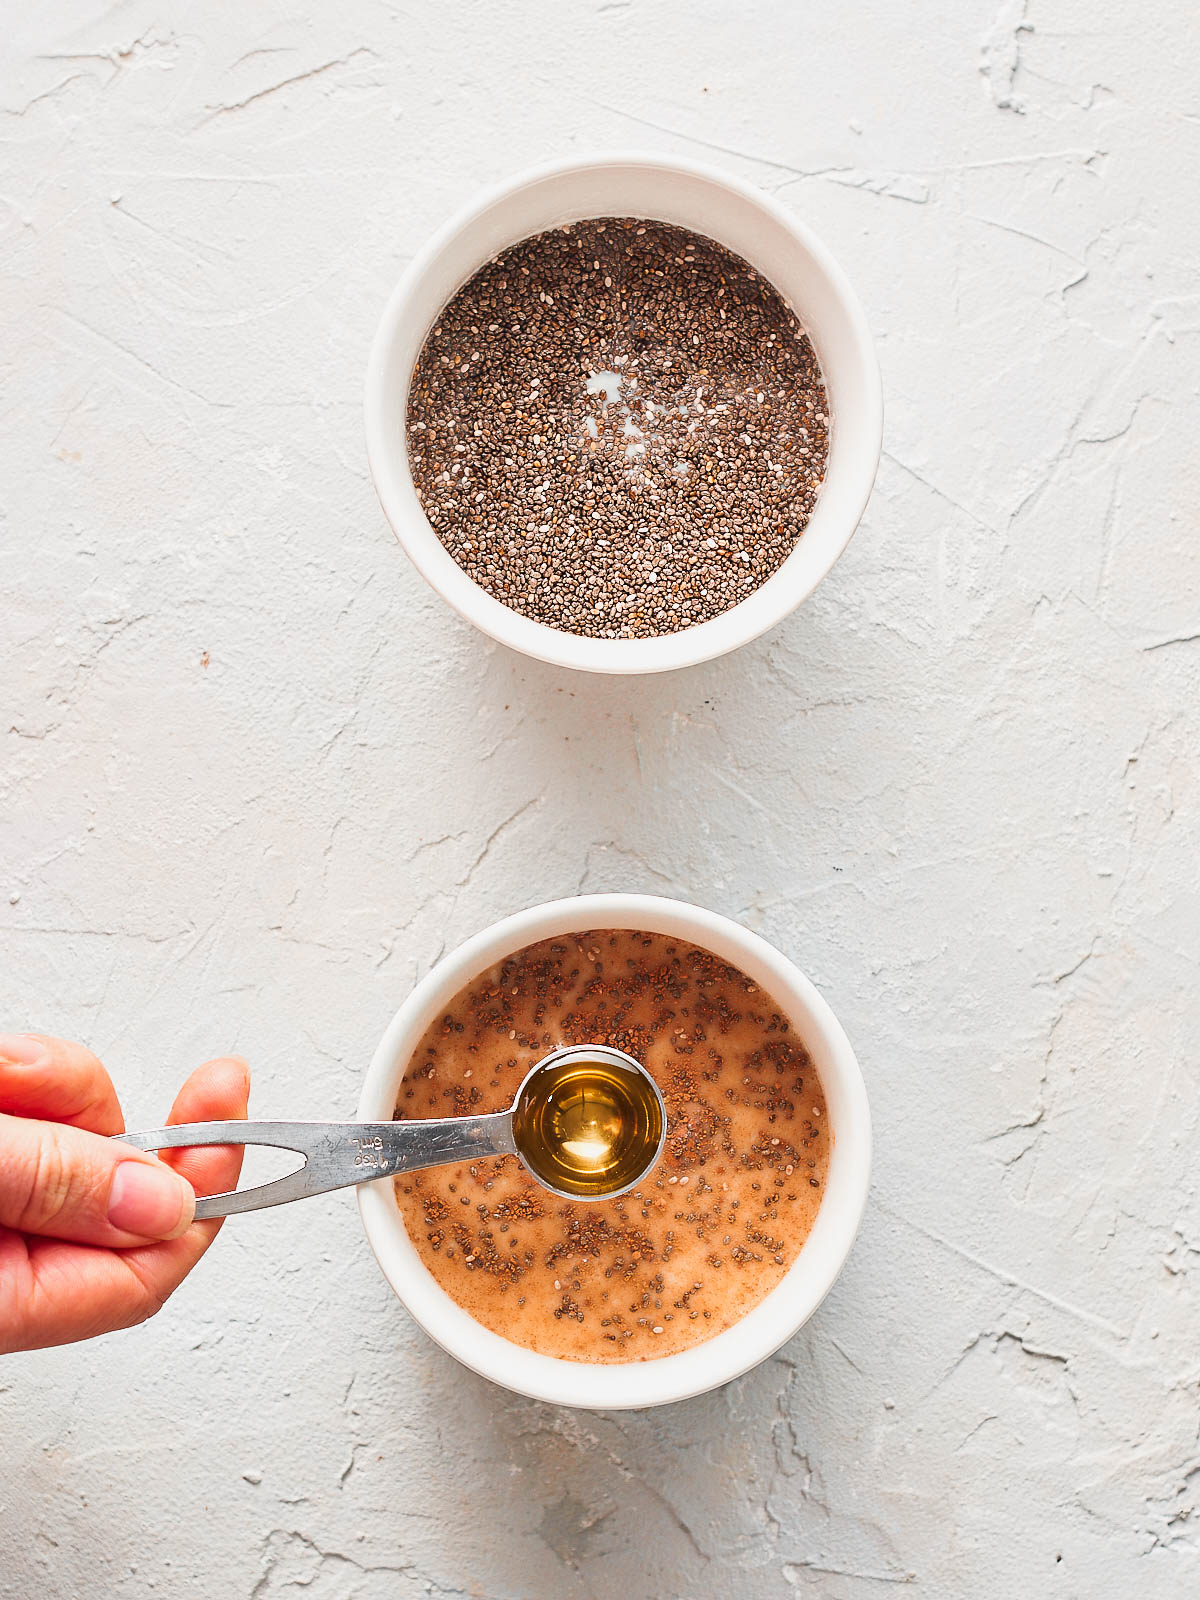 Adding agave nectar to the chia seeds